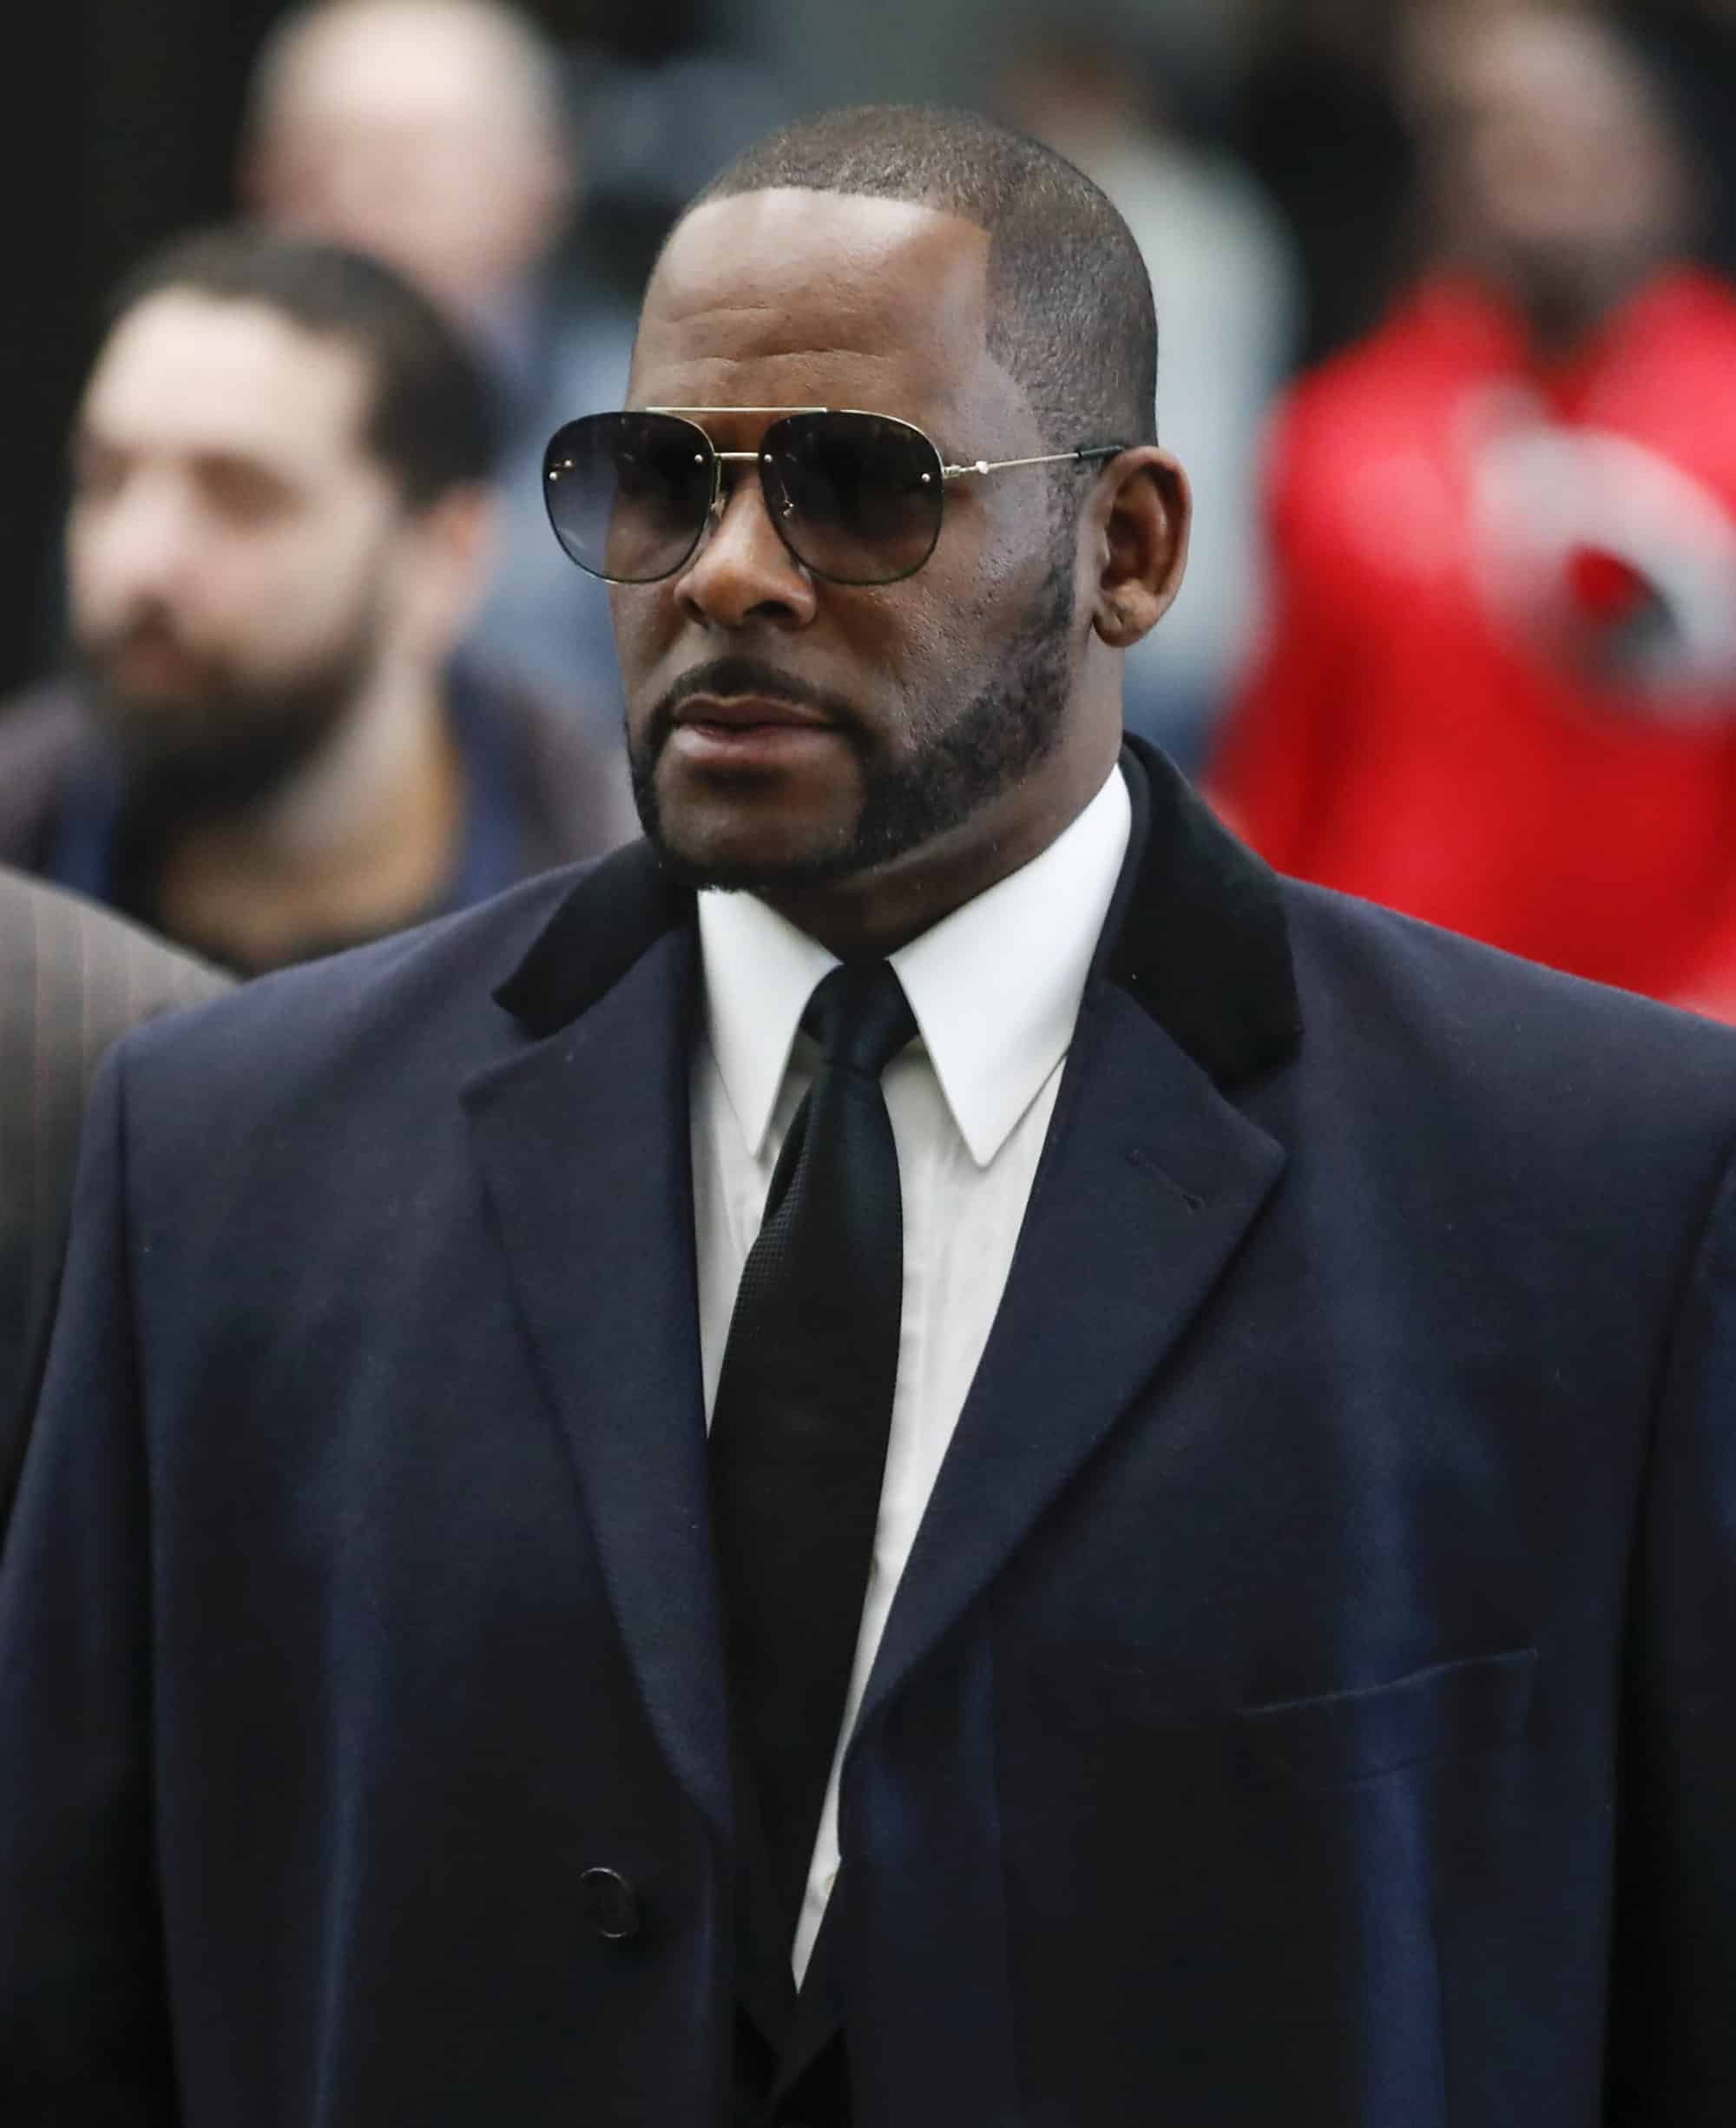 R. Kelly’s Associate Pleads Guilty To Attempting To Bribe Witness Not To Testify (Update)